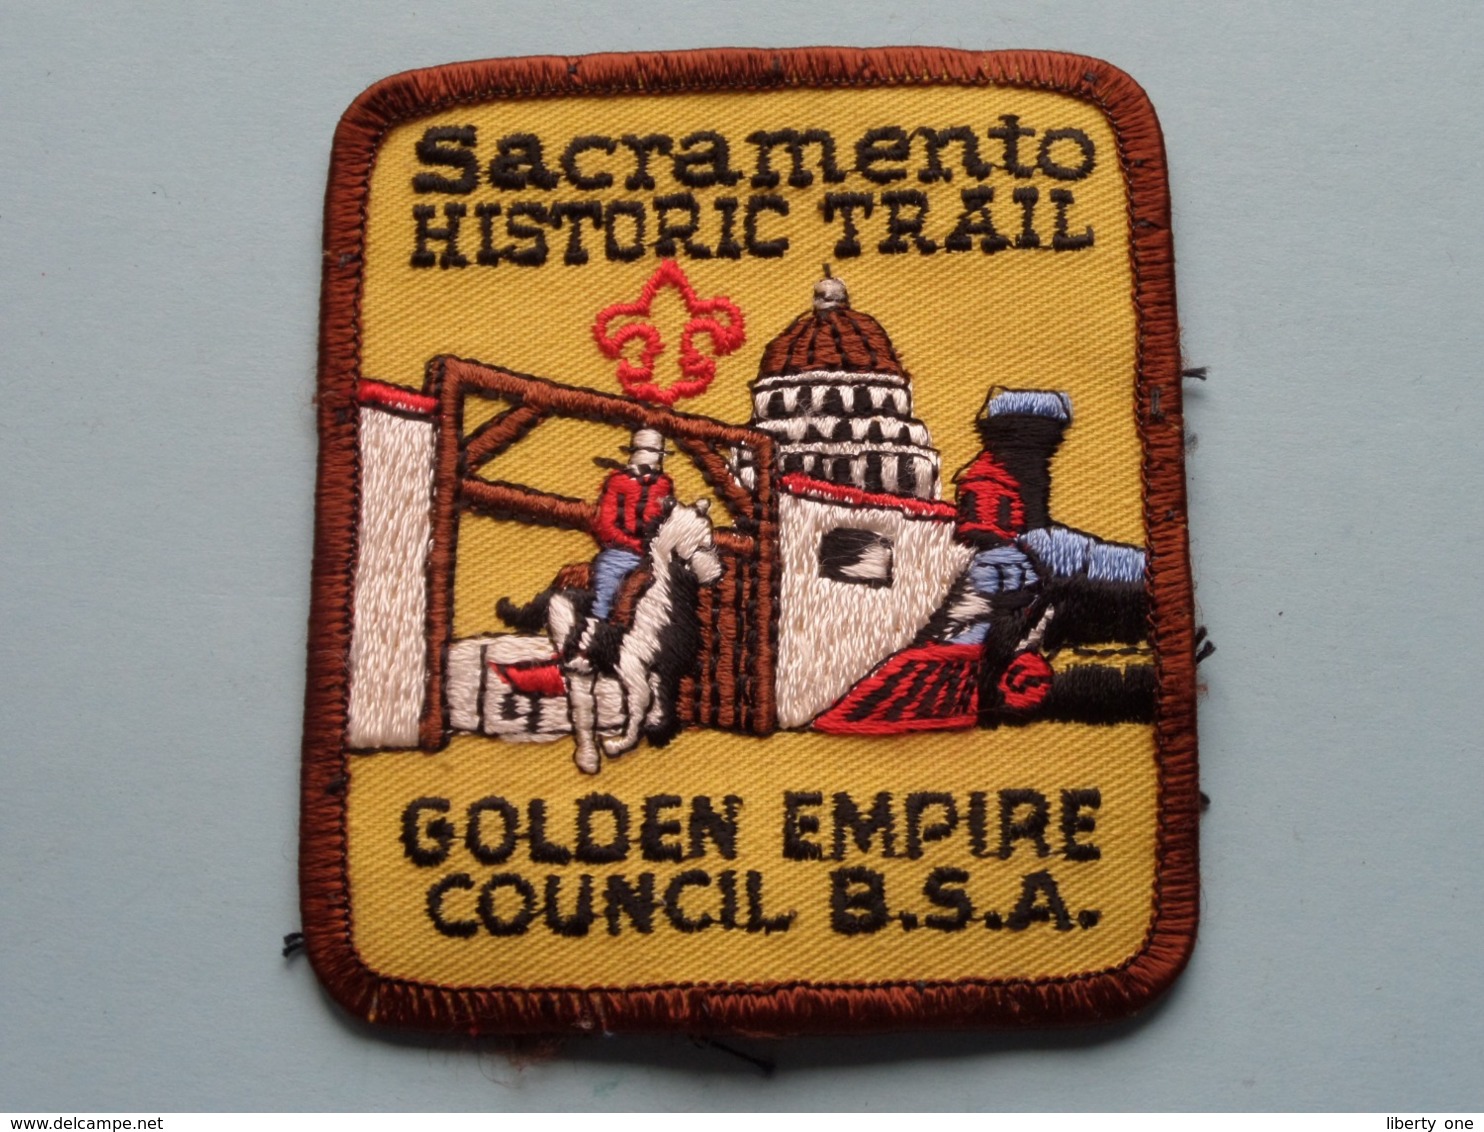 SACRAMENTO HISTORIC TRAIL > GOLDEN EMPIRE Council B.S.A. " SCOUTING " ( What You See Is What You Get > See Photo ) ! - Padvinderij